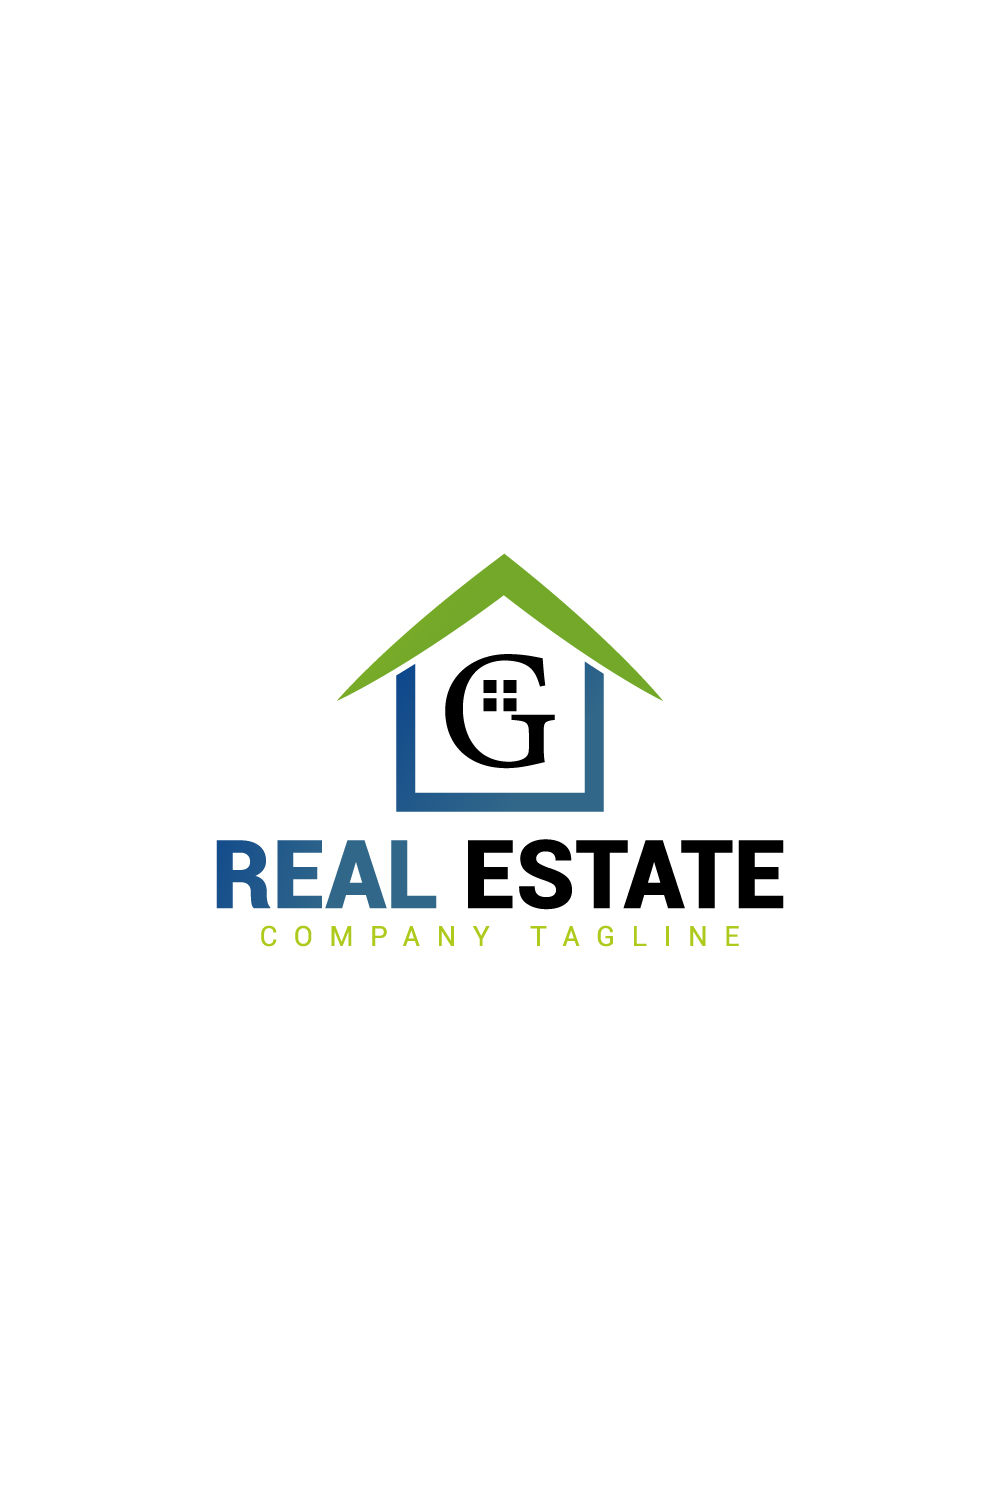 Real estate logo with green, dark blue color and G letter pinterest preview image.